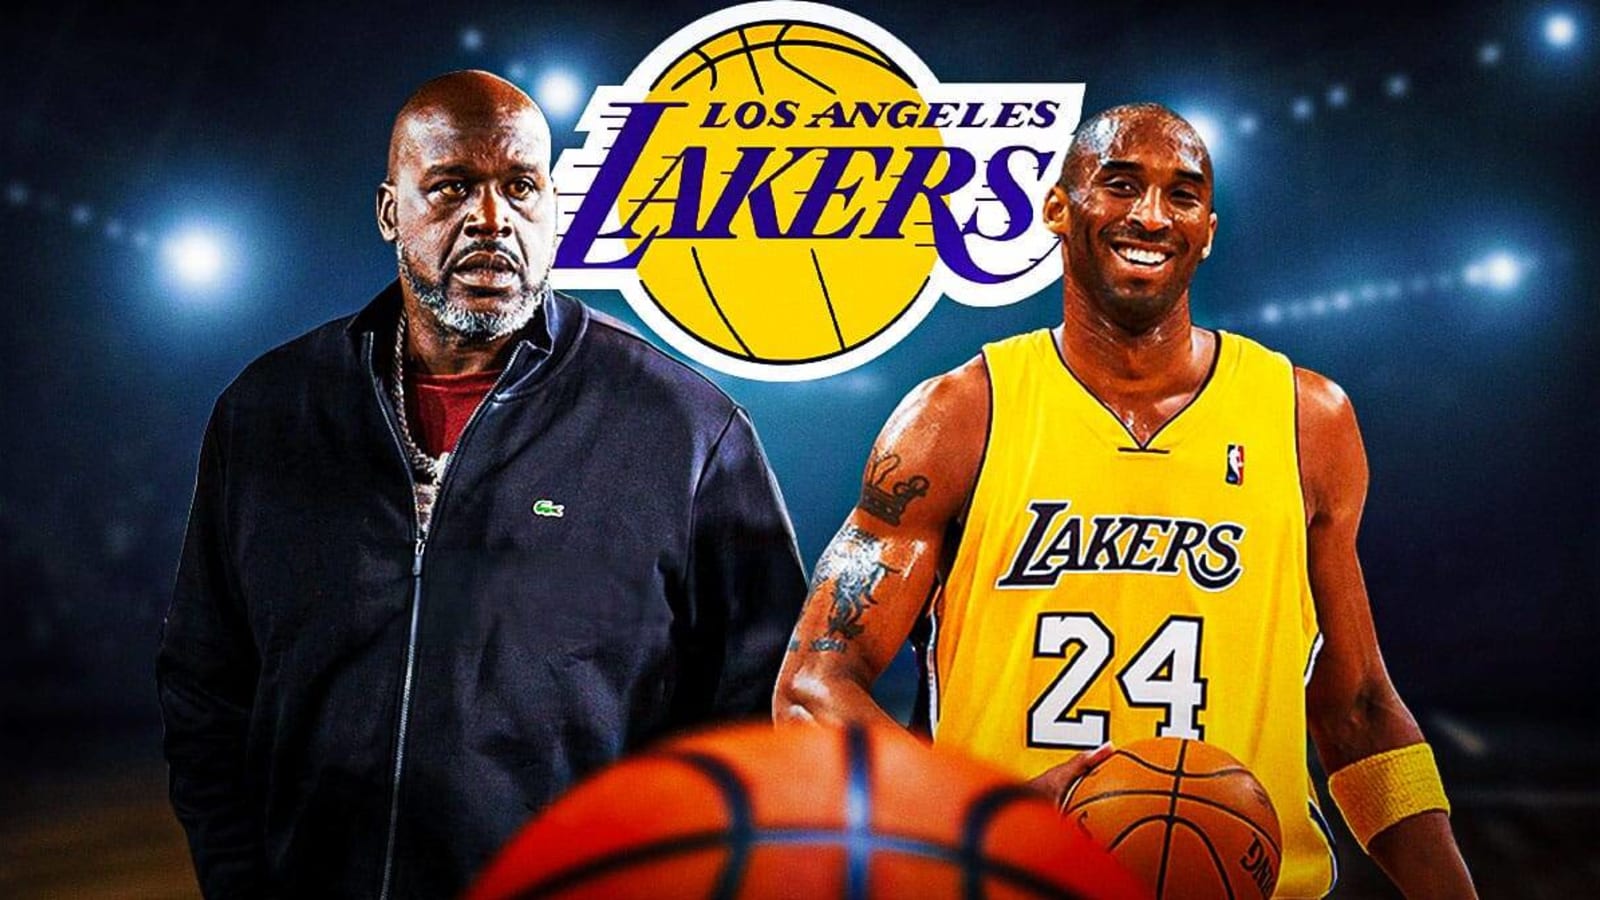 Lakers legend Shaquille O’Neal bothered by Kobe Bryant’s exclusion from GOAT debate